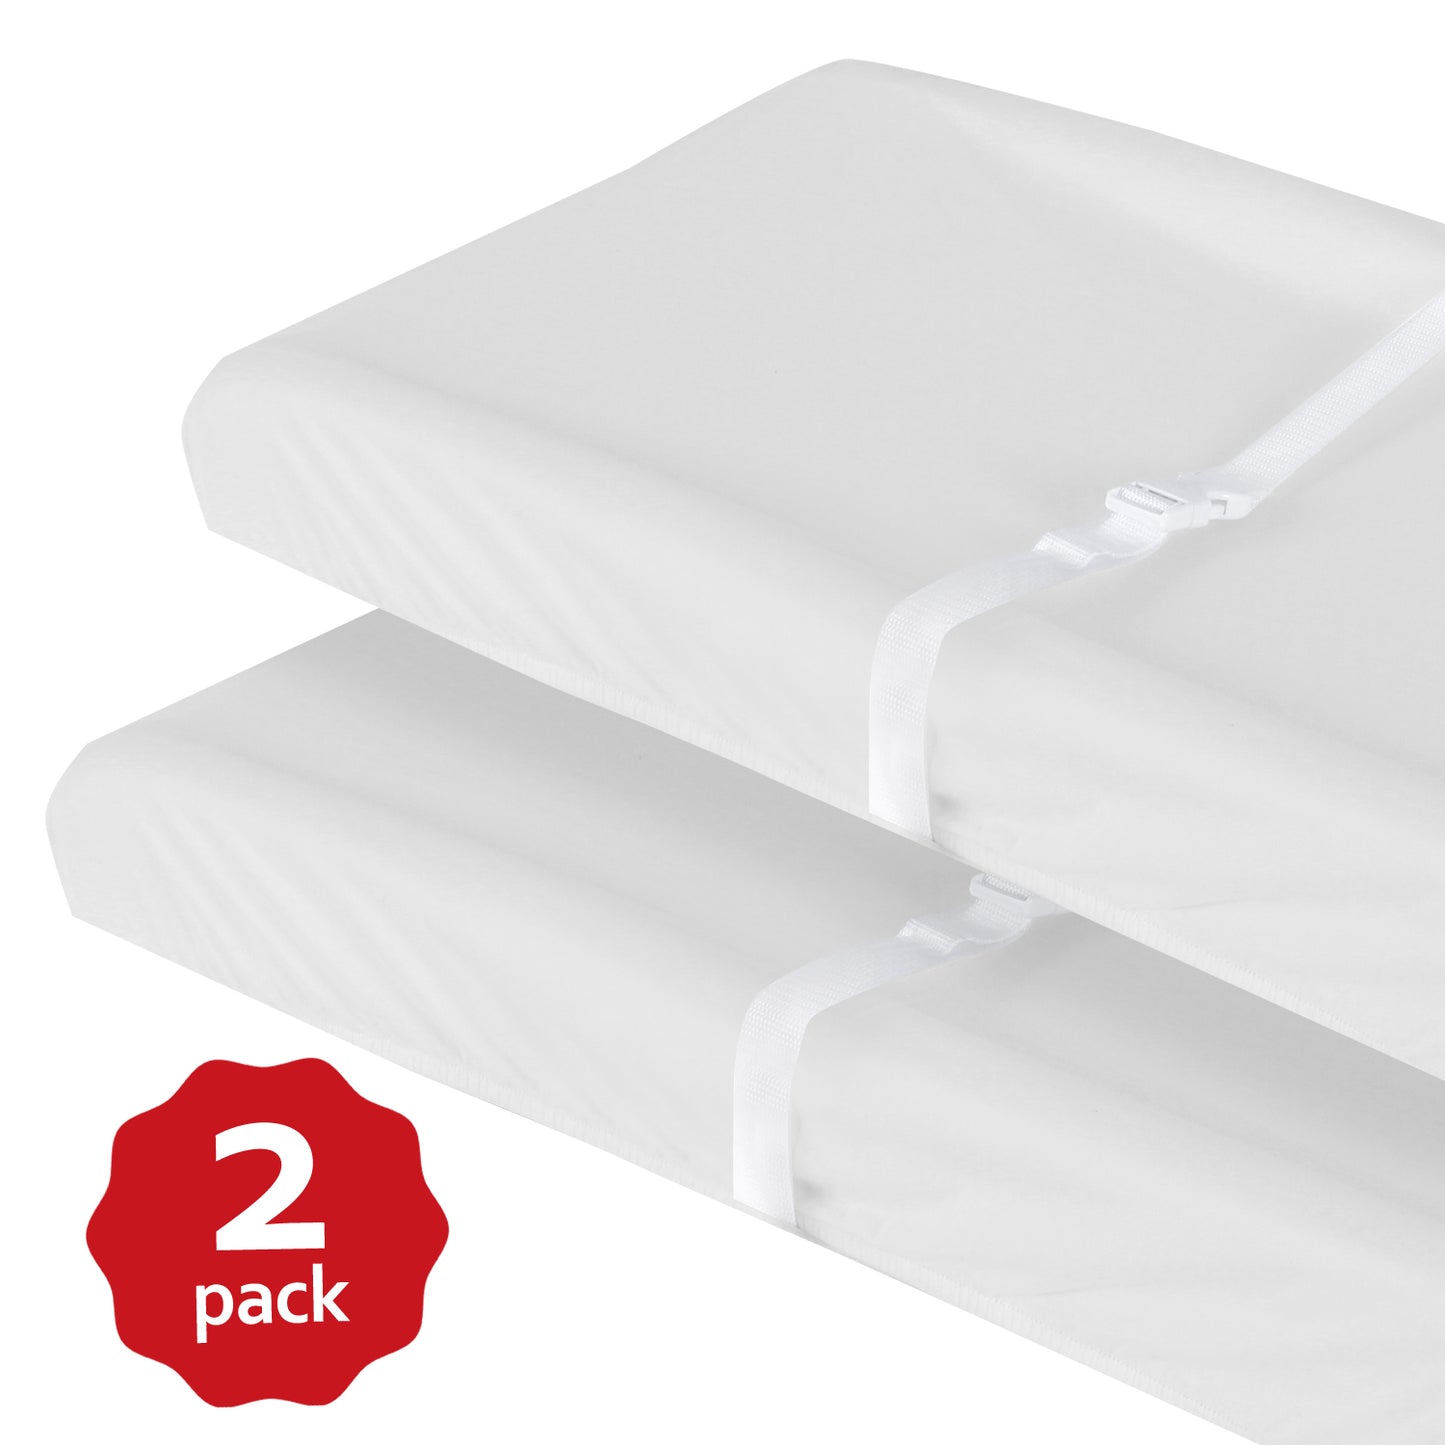 Changing Pad Cover- 2 Pack White, Ultra Soft Jersey Knit Cotton